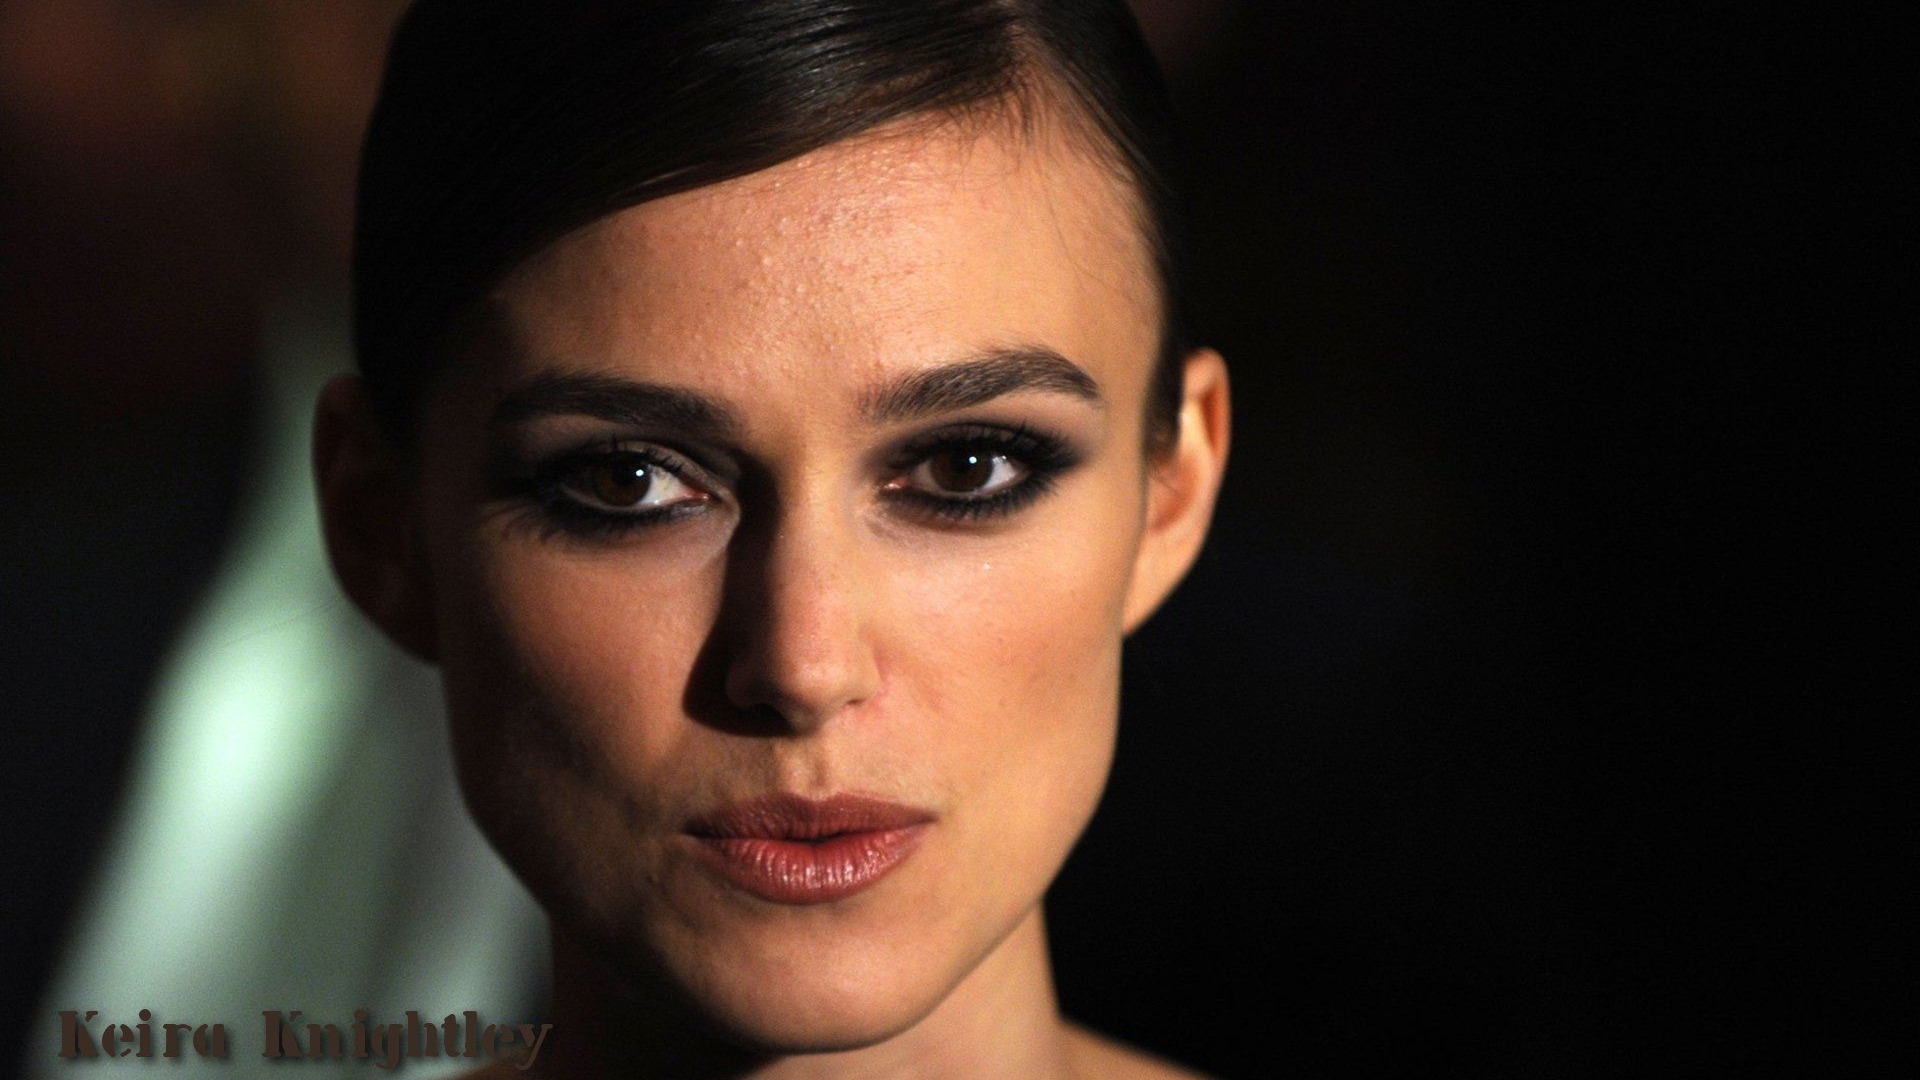 Keira Knightley #145 - 1920x1080 Wallpapers Pictures Photos Images